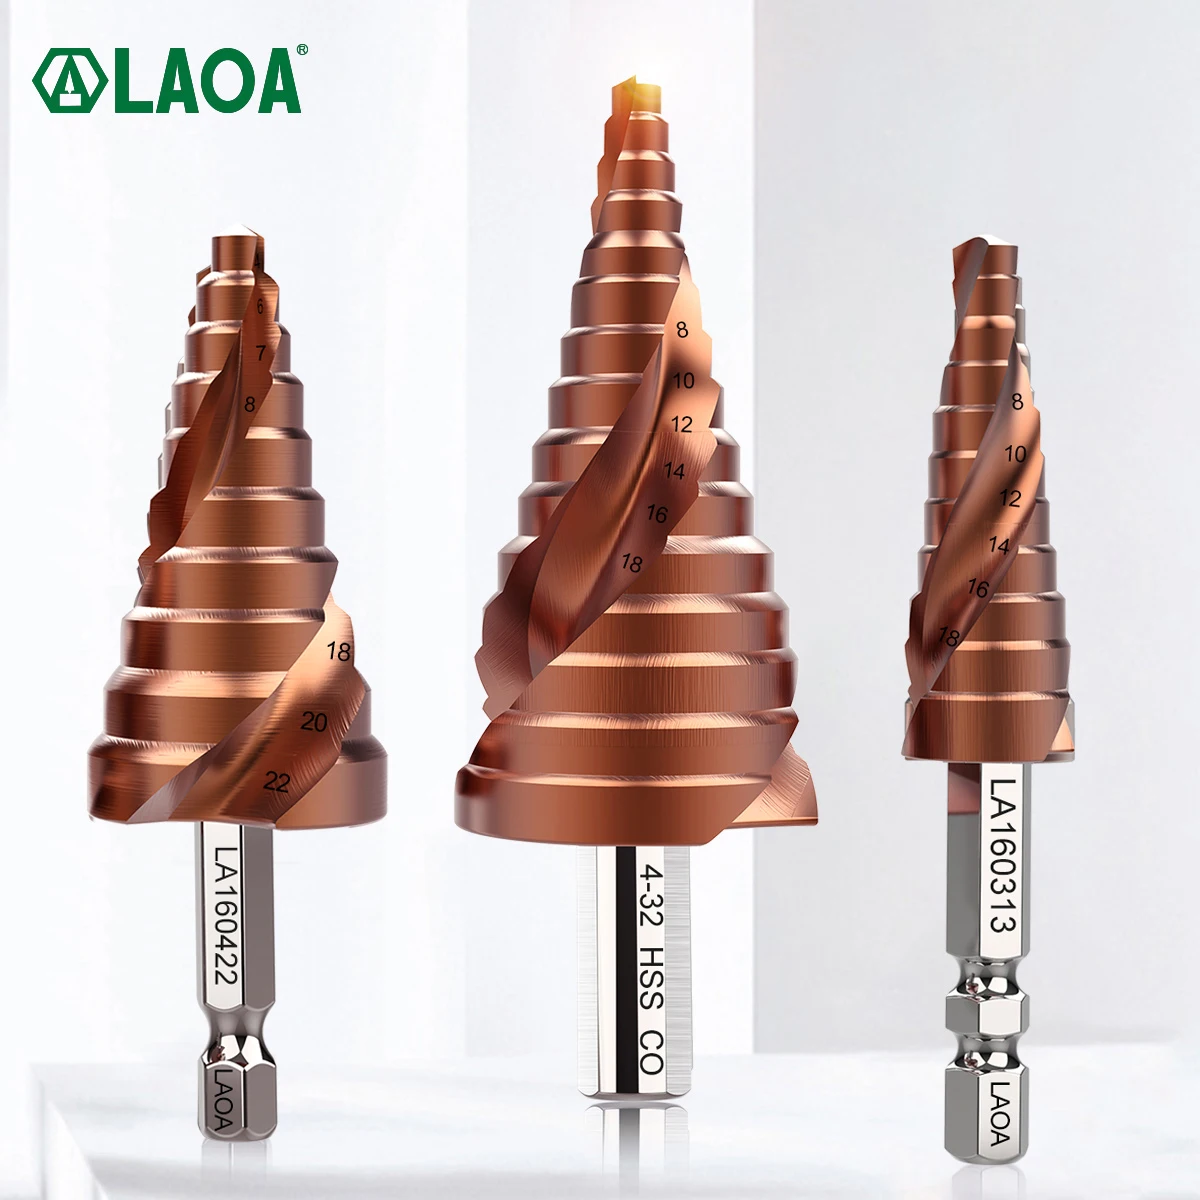 

LAOA Pagoda Step Drill Bit 3-13mm 4-22mm 4-32mm HSS-CO M35 Hex Triangle Spiral Grooved Wood Metal Hole Cutter Drilling Tools Set